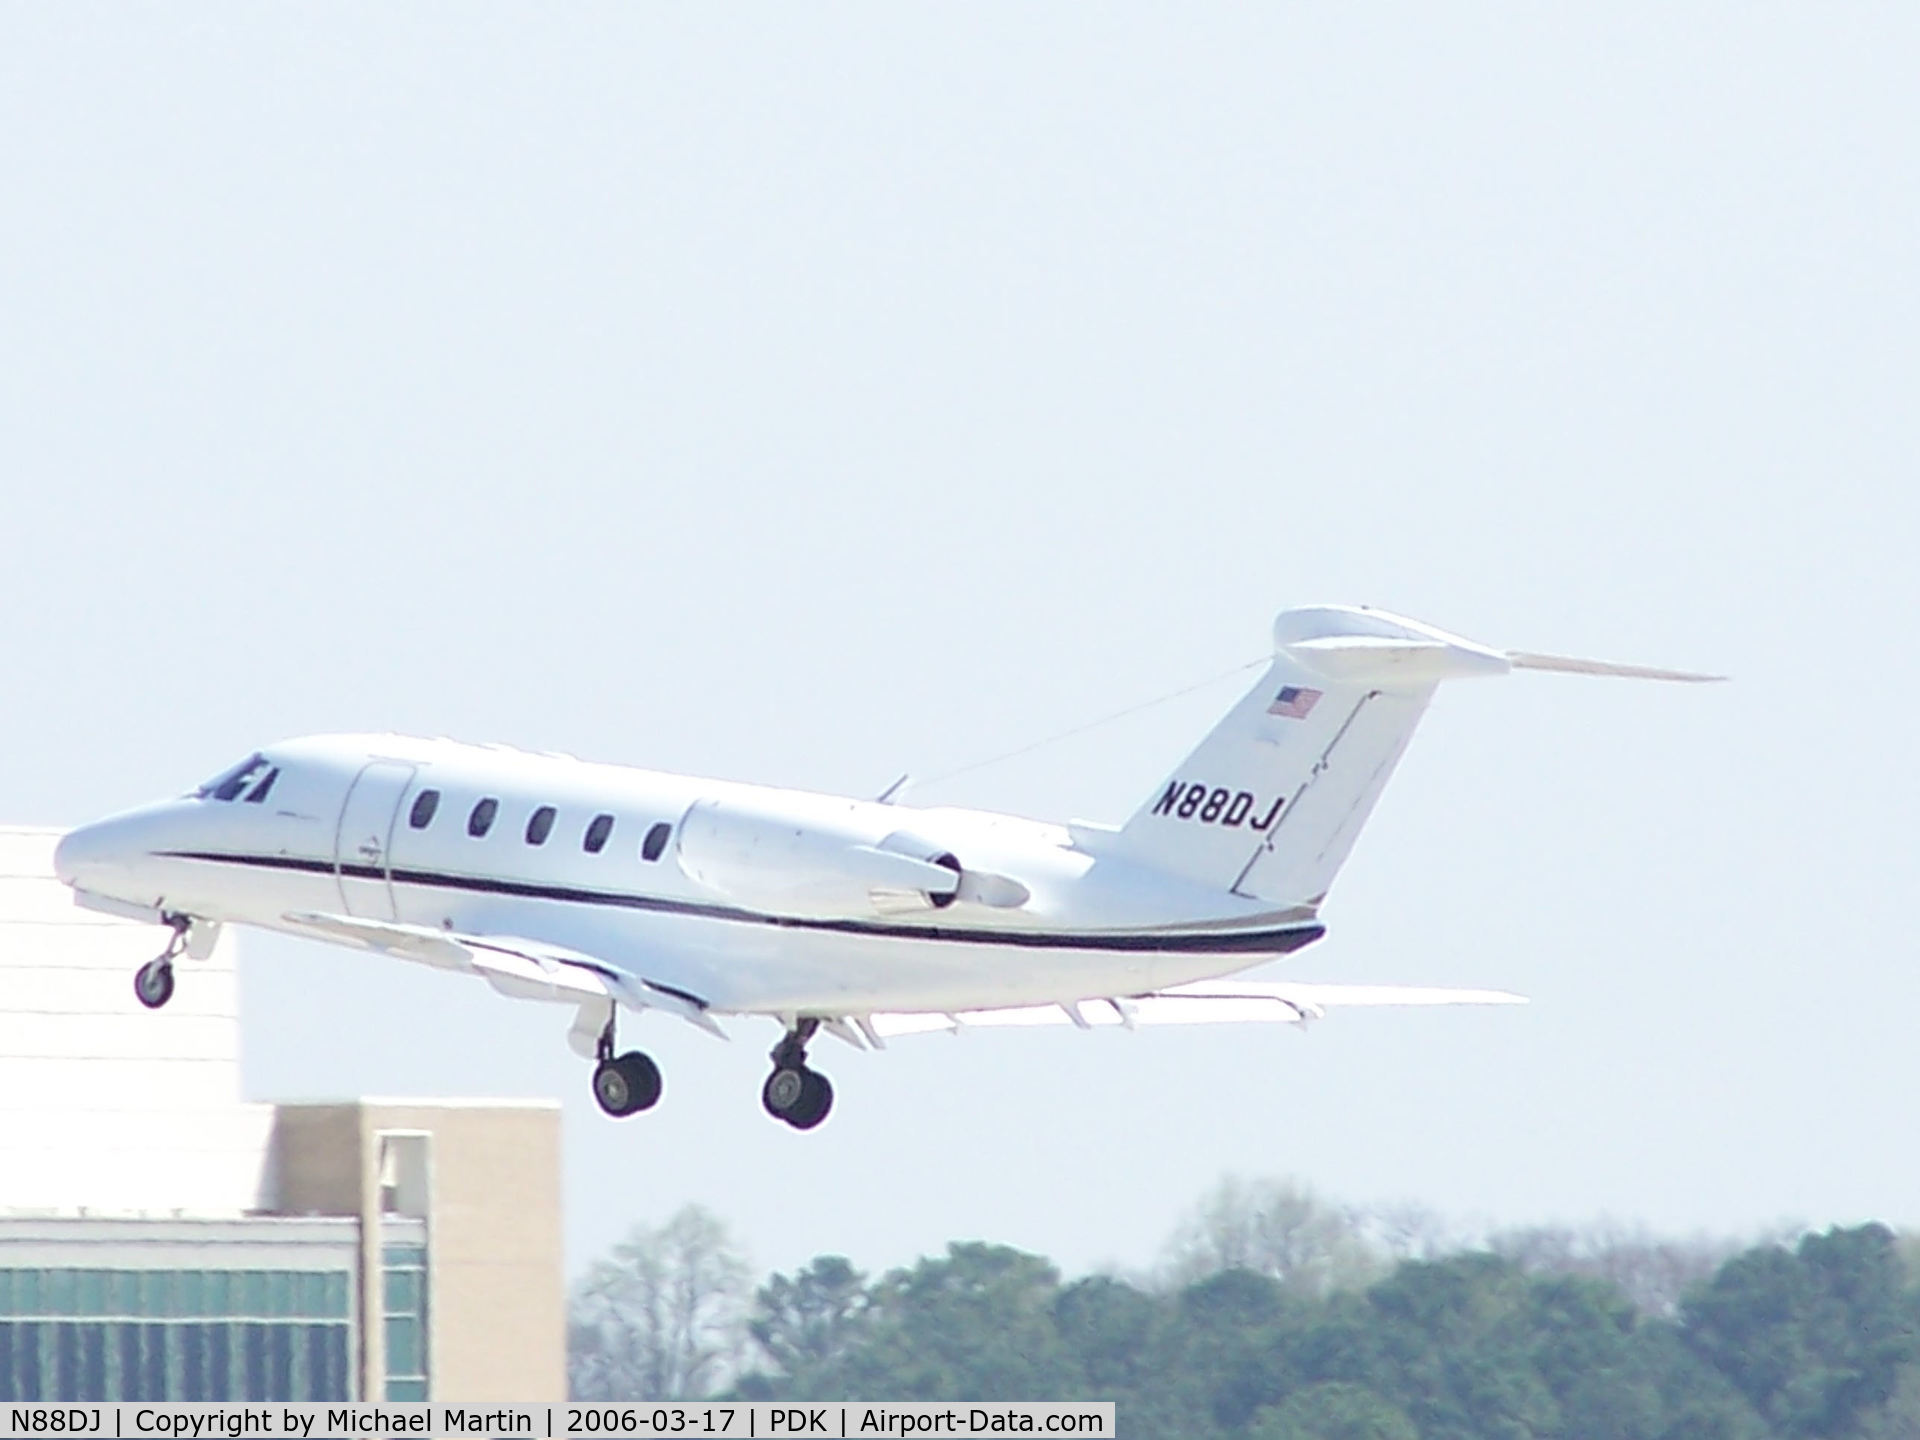 N88DJ, 1989 Cessna 650 Citation III C/N 650-0167, Departing PDK enroute to 4A7 with racer Dale Jarrett